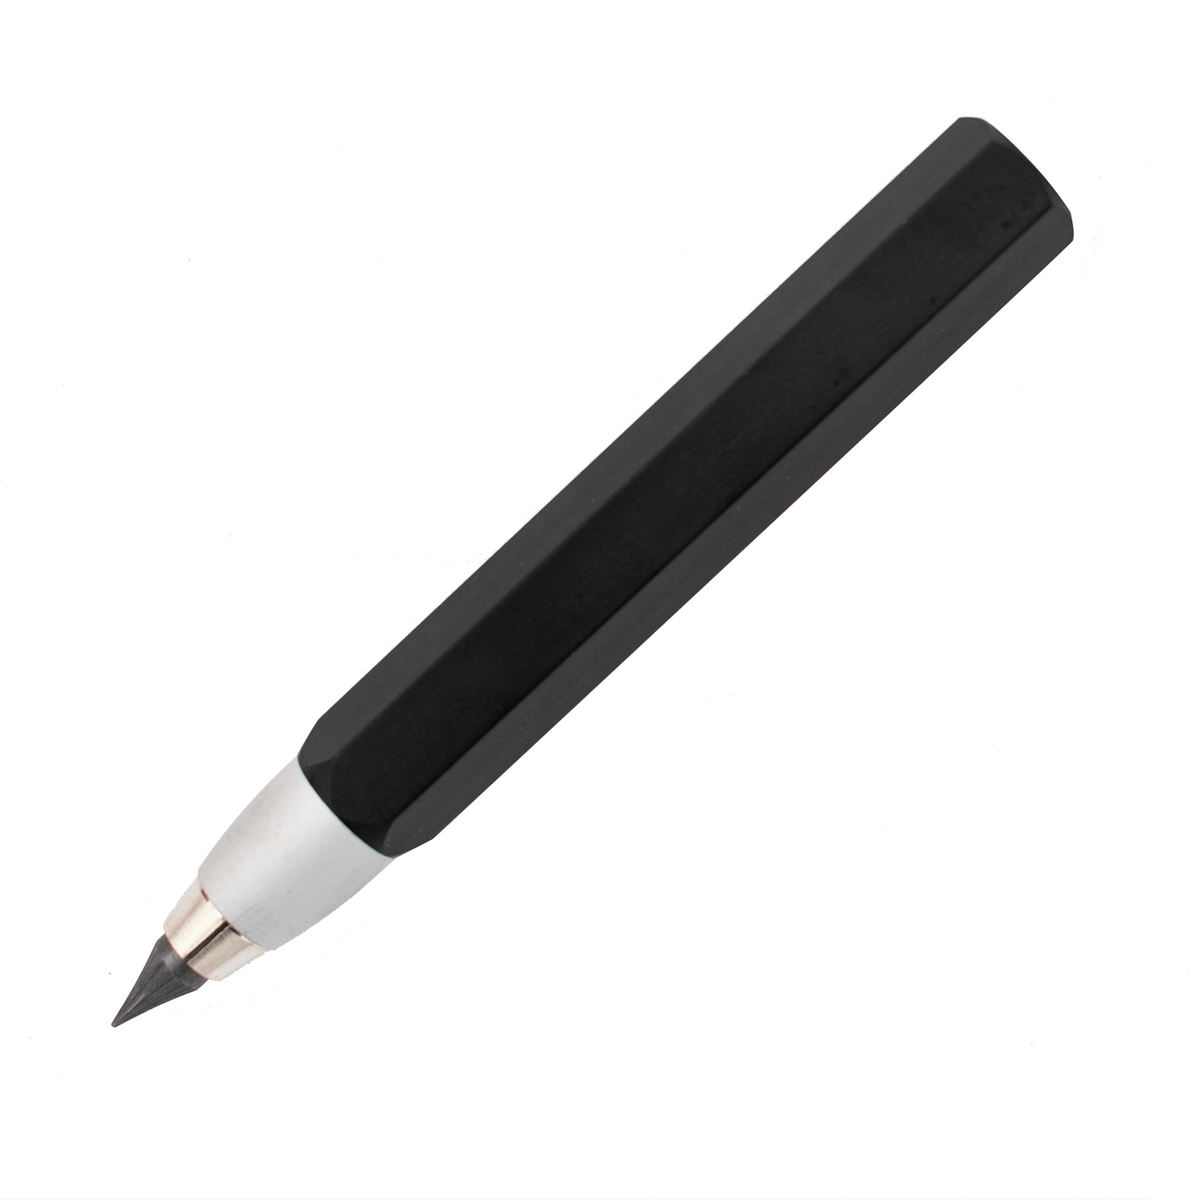 Worther Compact Alum 5.6mm Mechanical Pencil